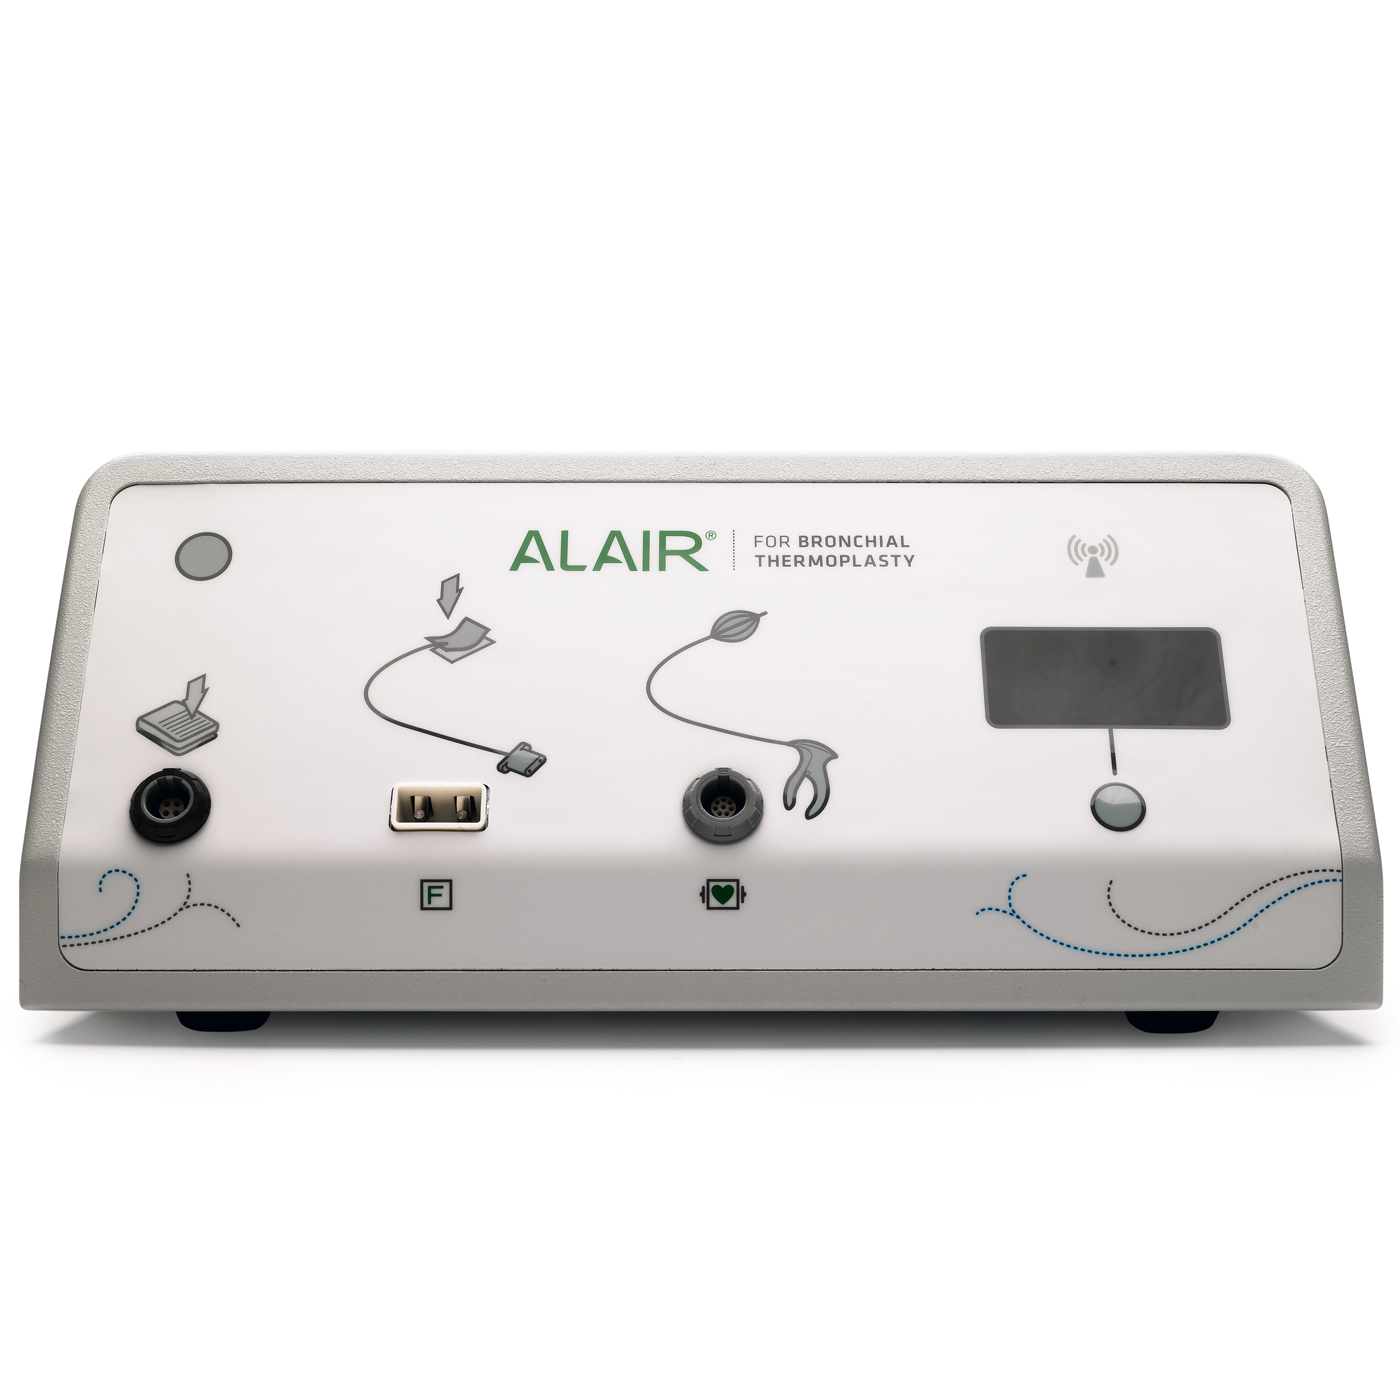 The Alair System Controller